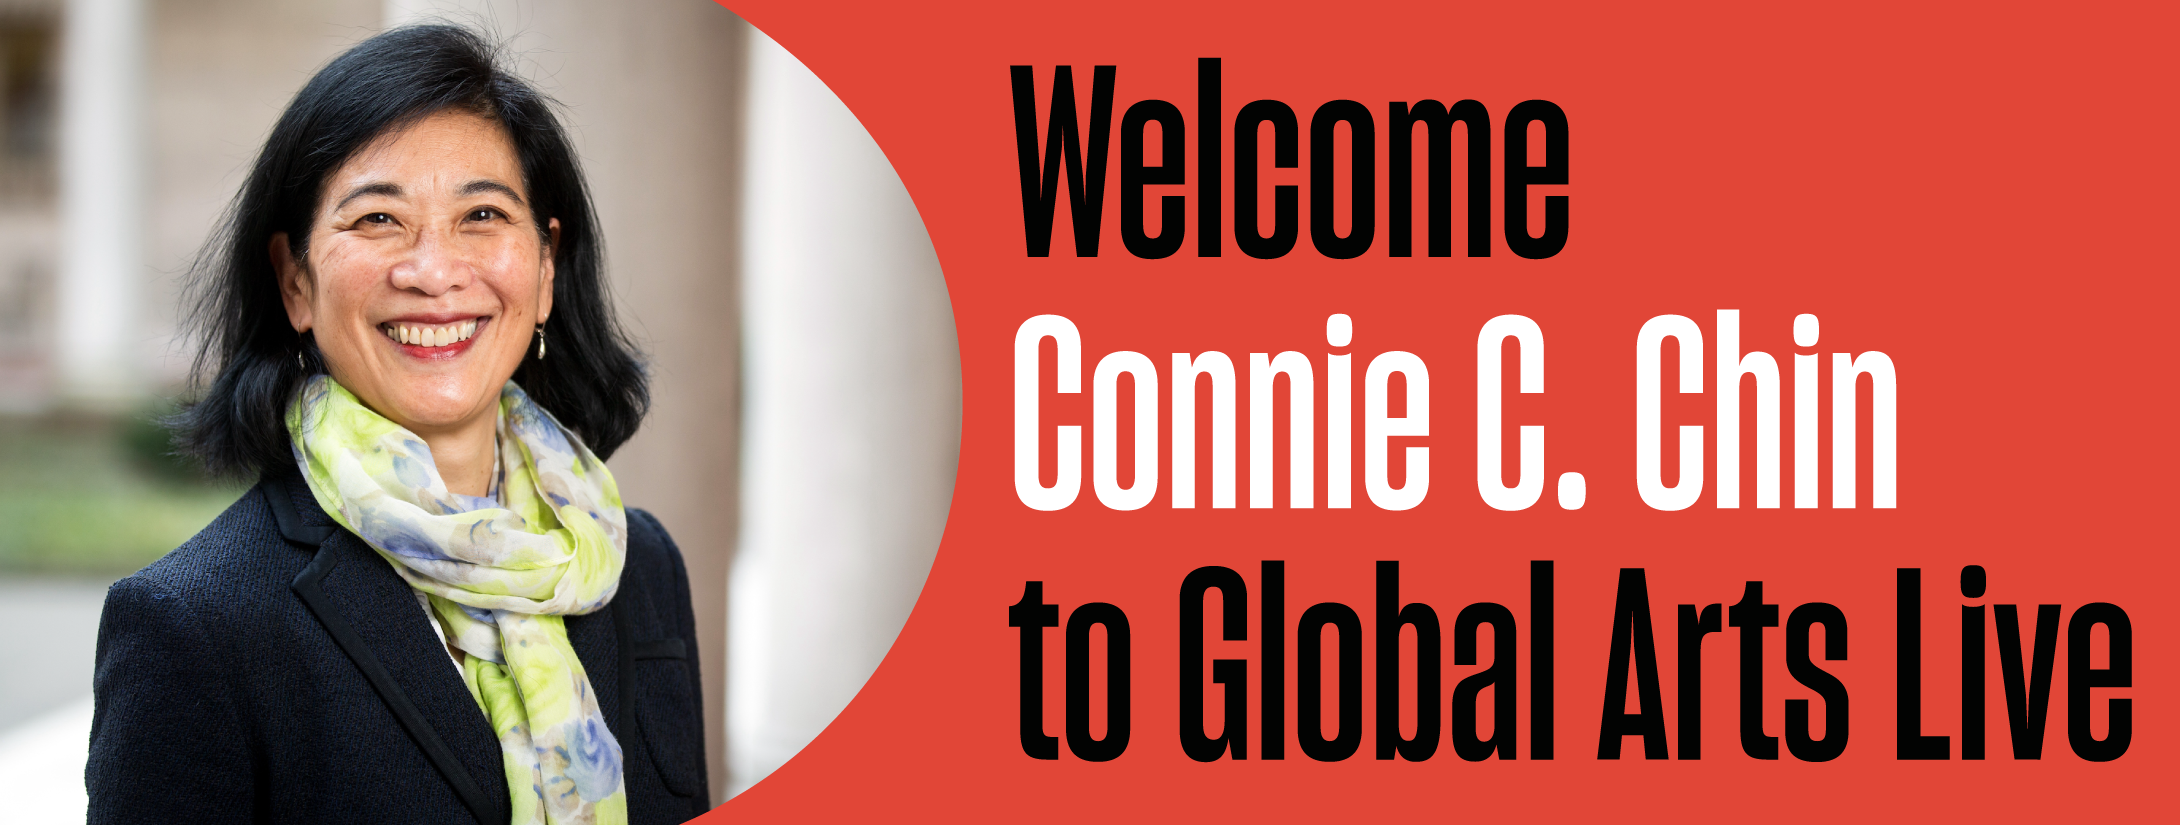 Connie C Chin welcome banner